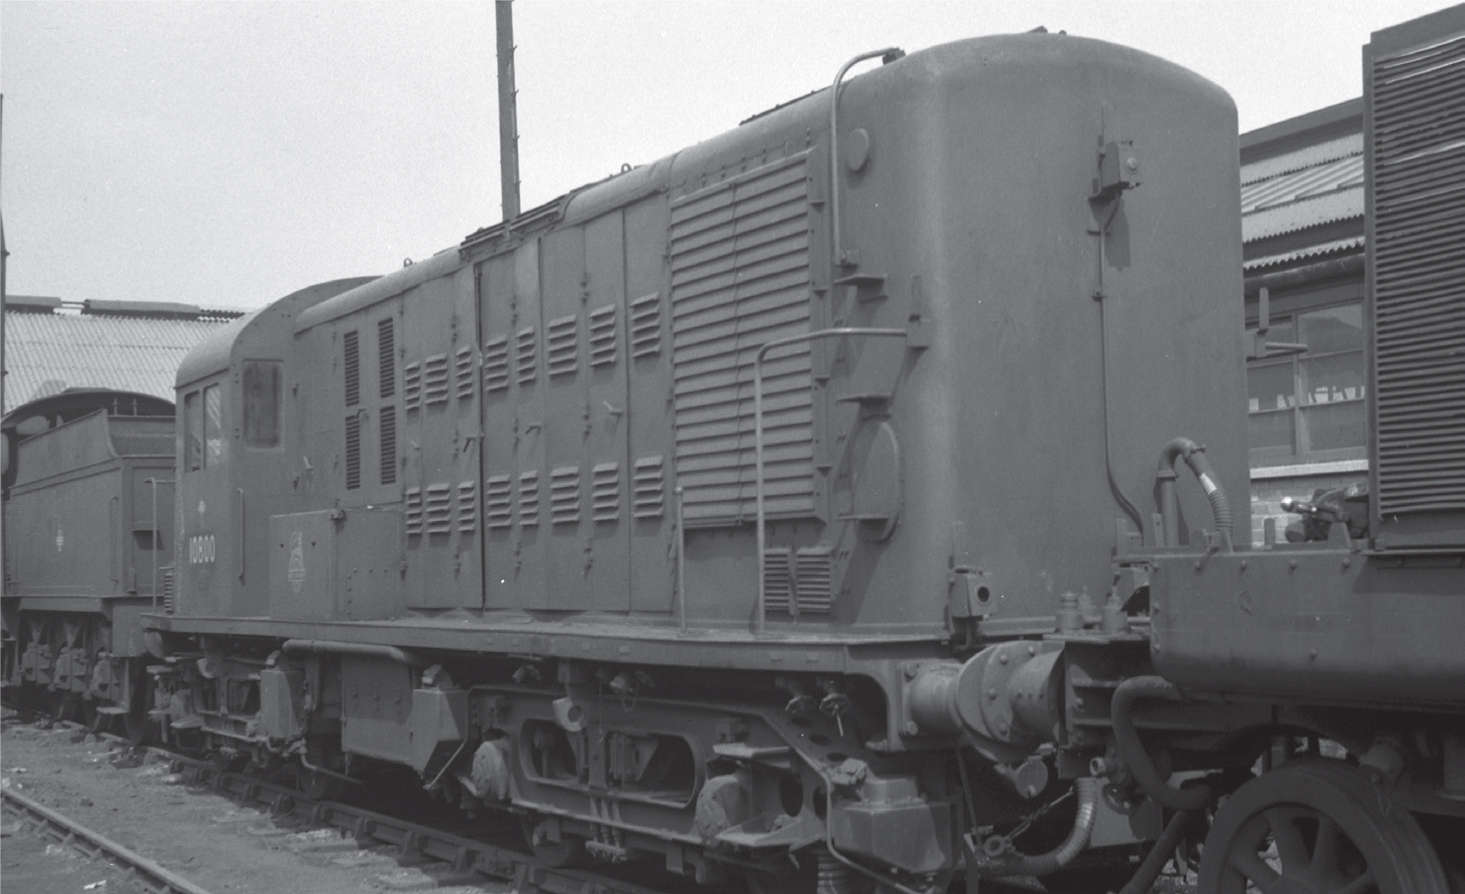 Ordered by the LMS no 10800 first appeared in 1950 Later rebuilt by Brush - photo 11